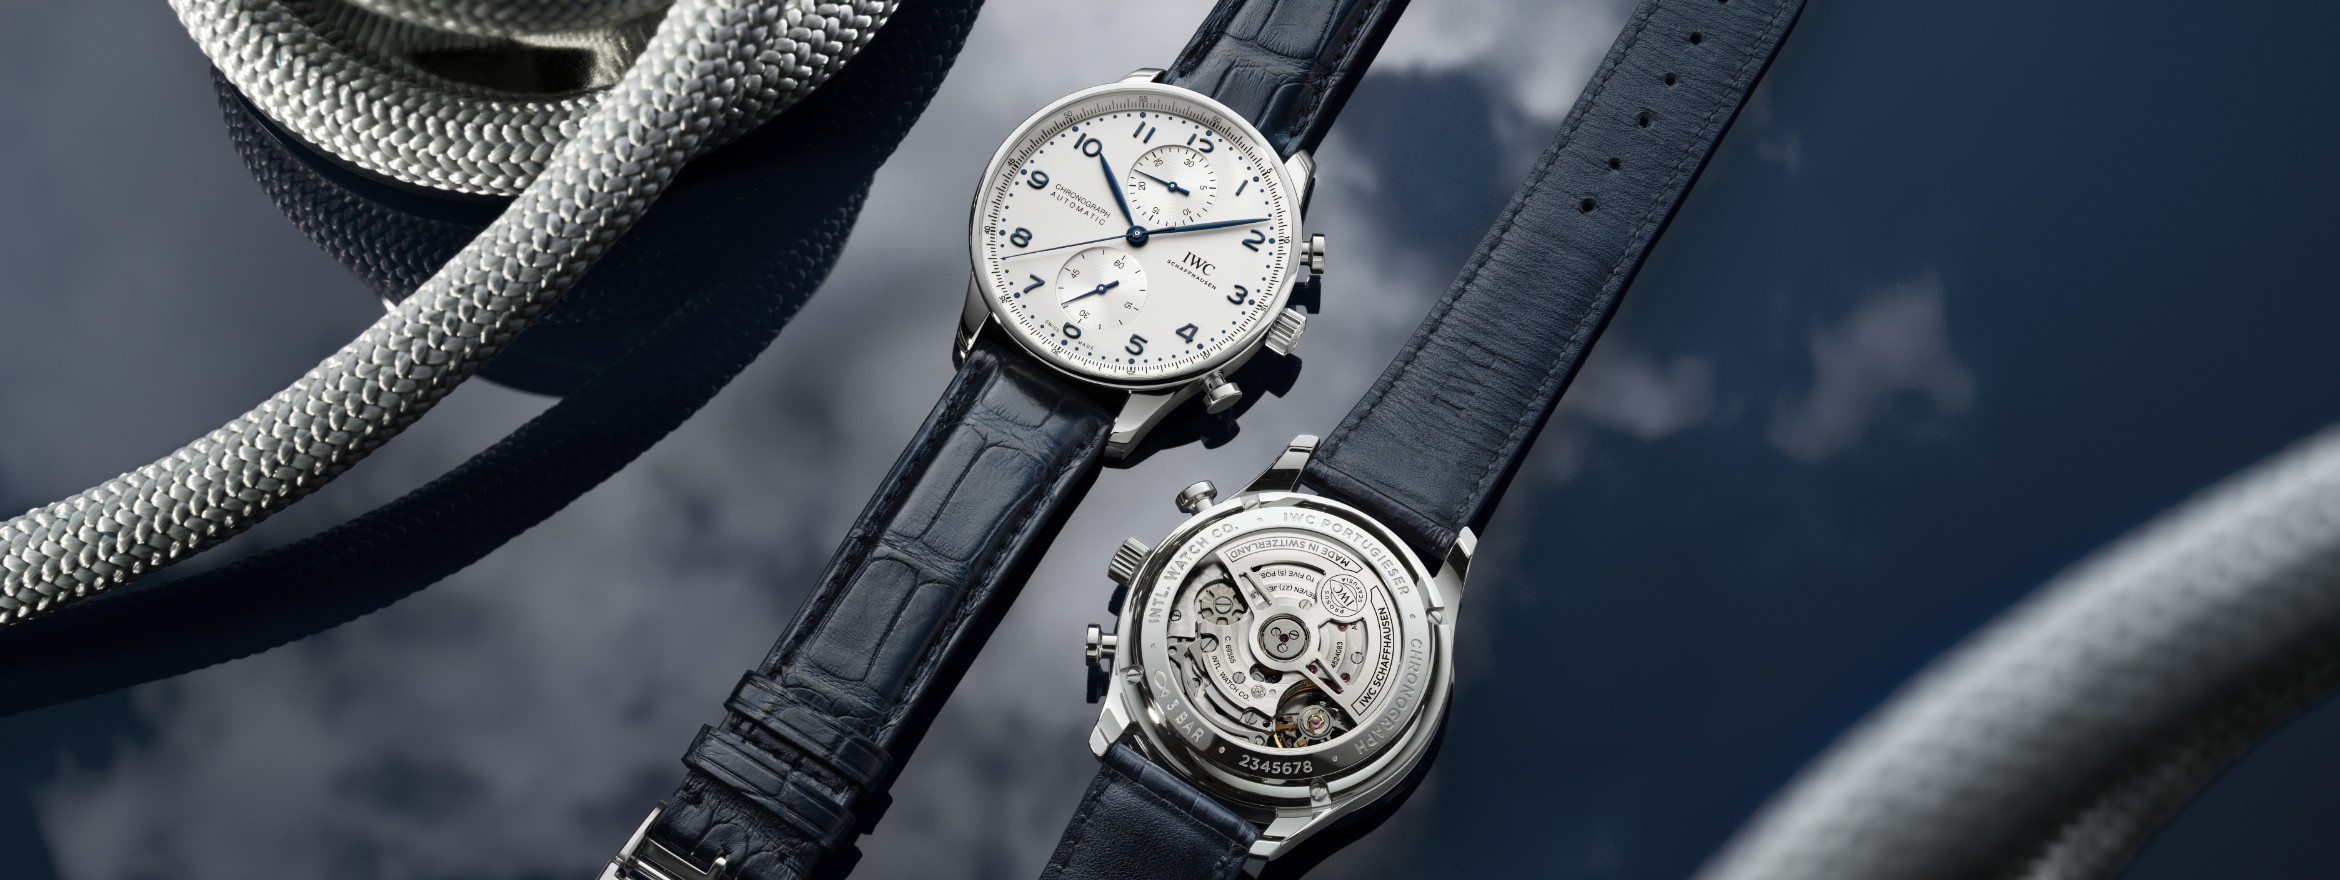 IWC’s ‘In-House’ Portugieser Chronograph